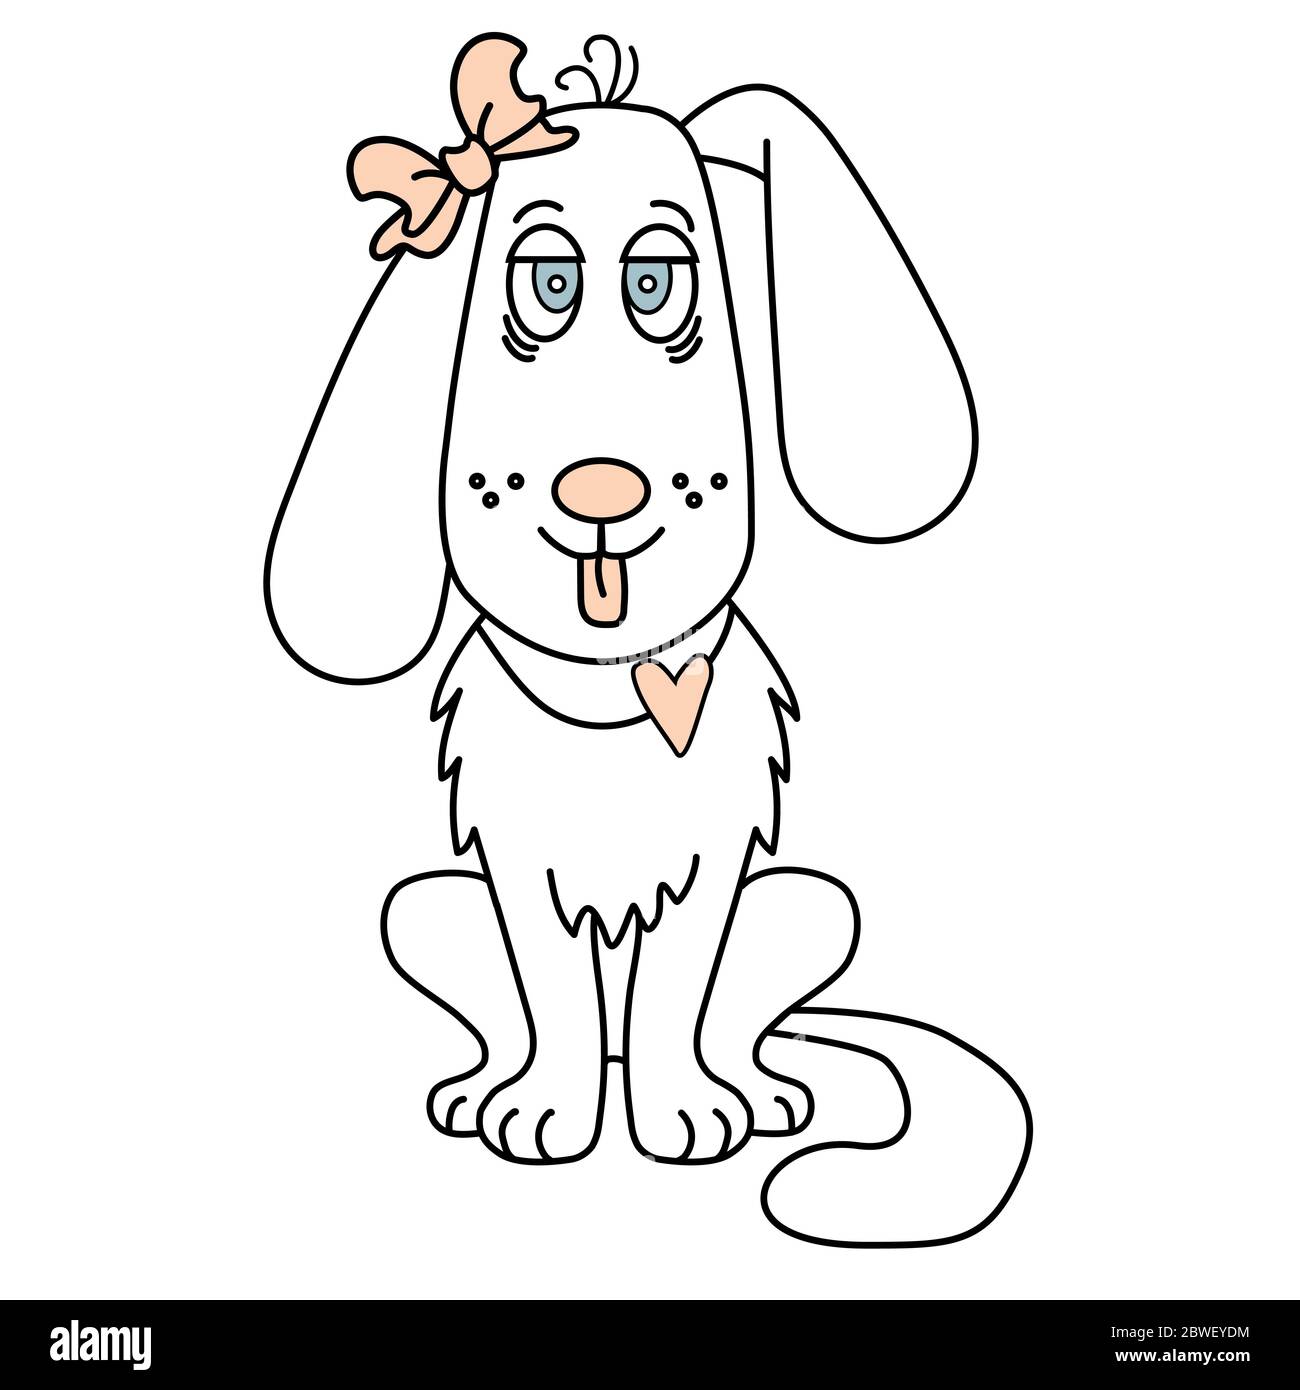 Cute white dog girl with bow and tongue and heart sticking out. Contour illustration Stock Vector